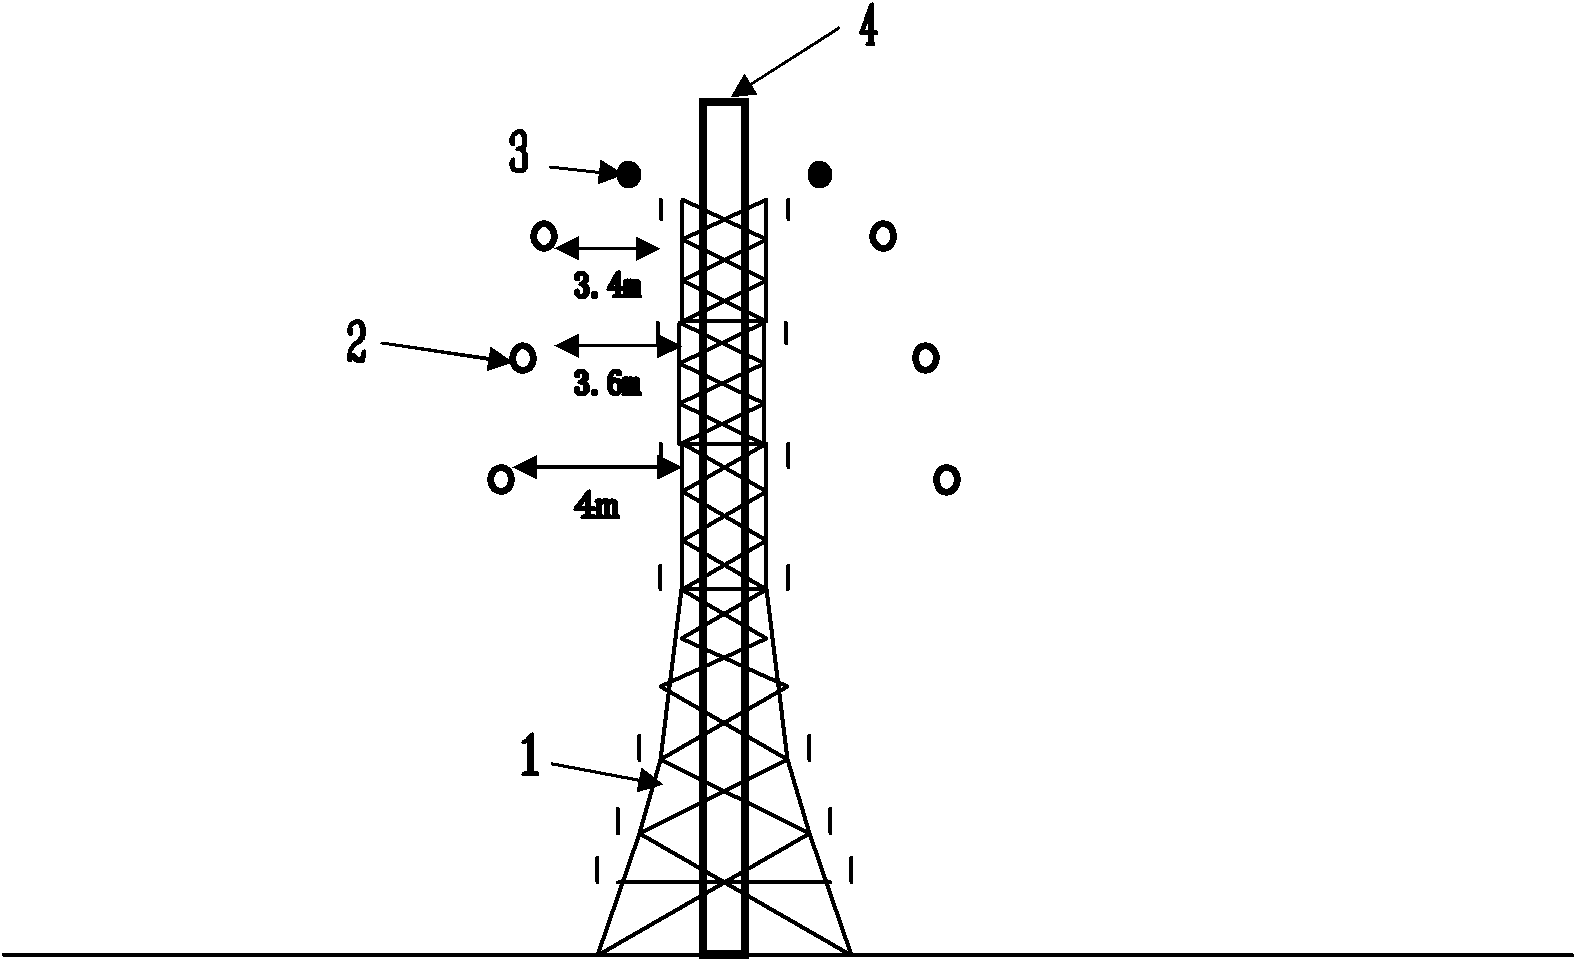 Method for transforming tangent tower of double-circuit double-bundle transmission lines by lifting in electrified mode in another place